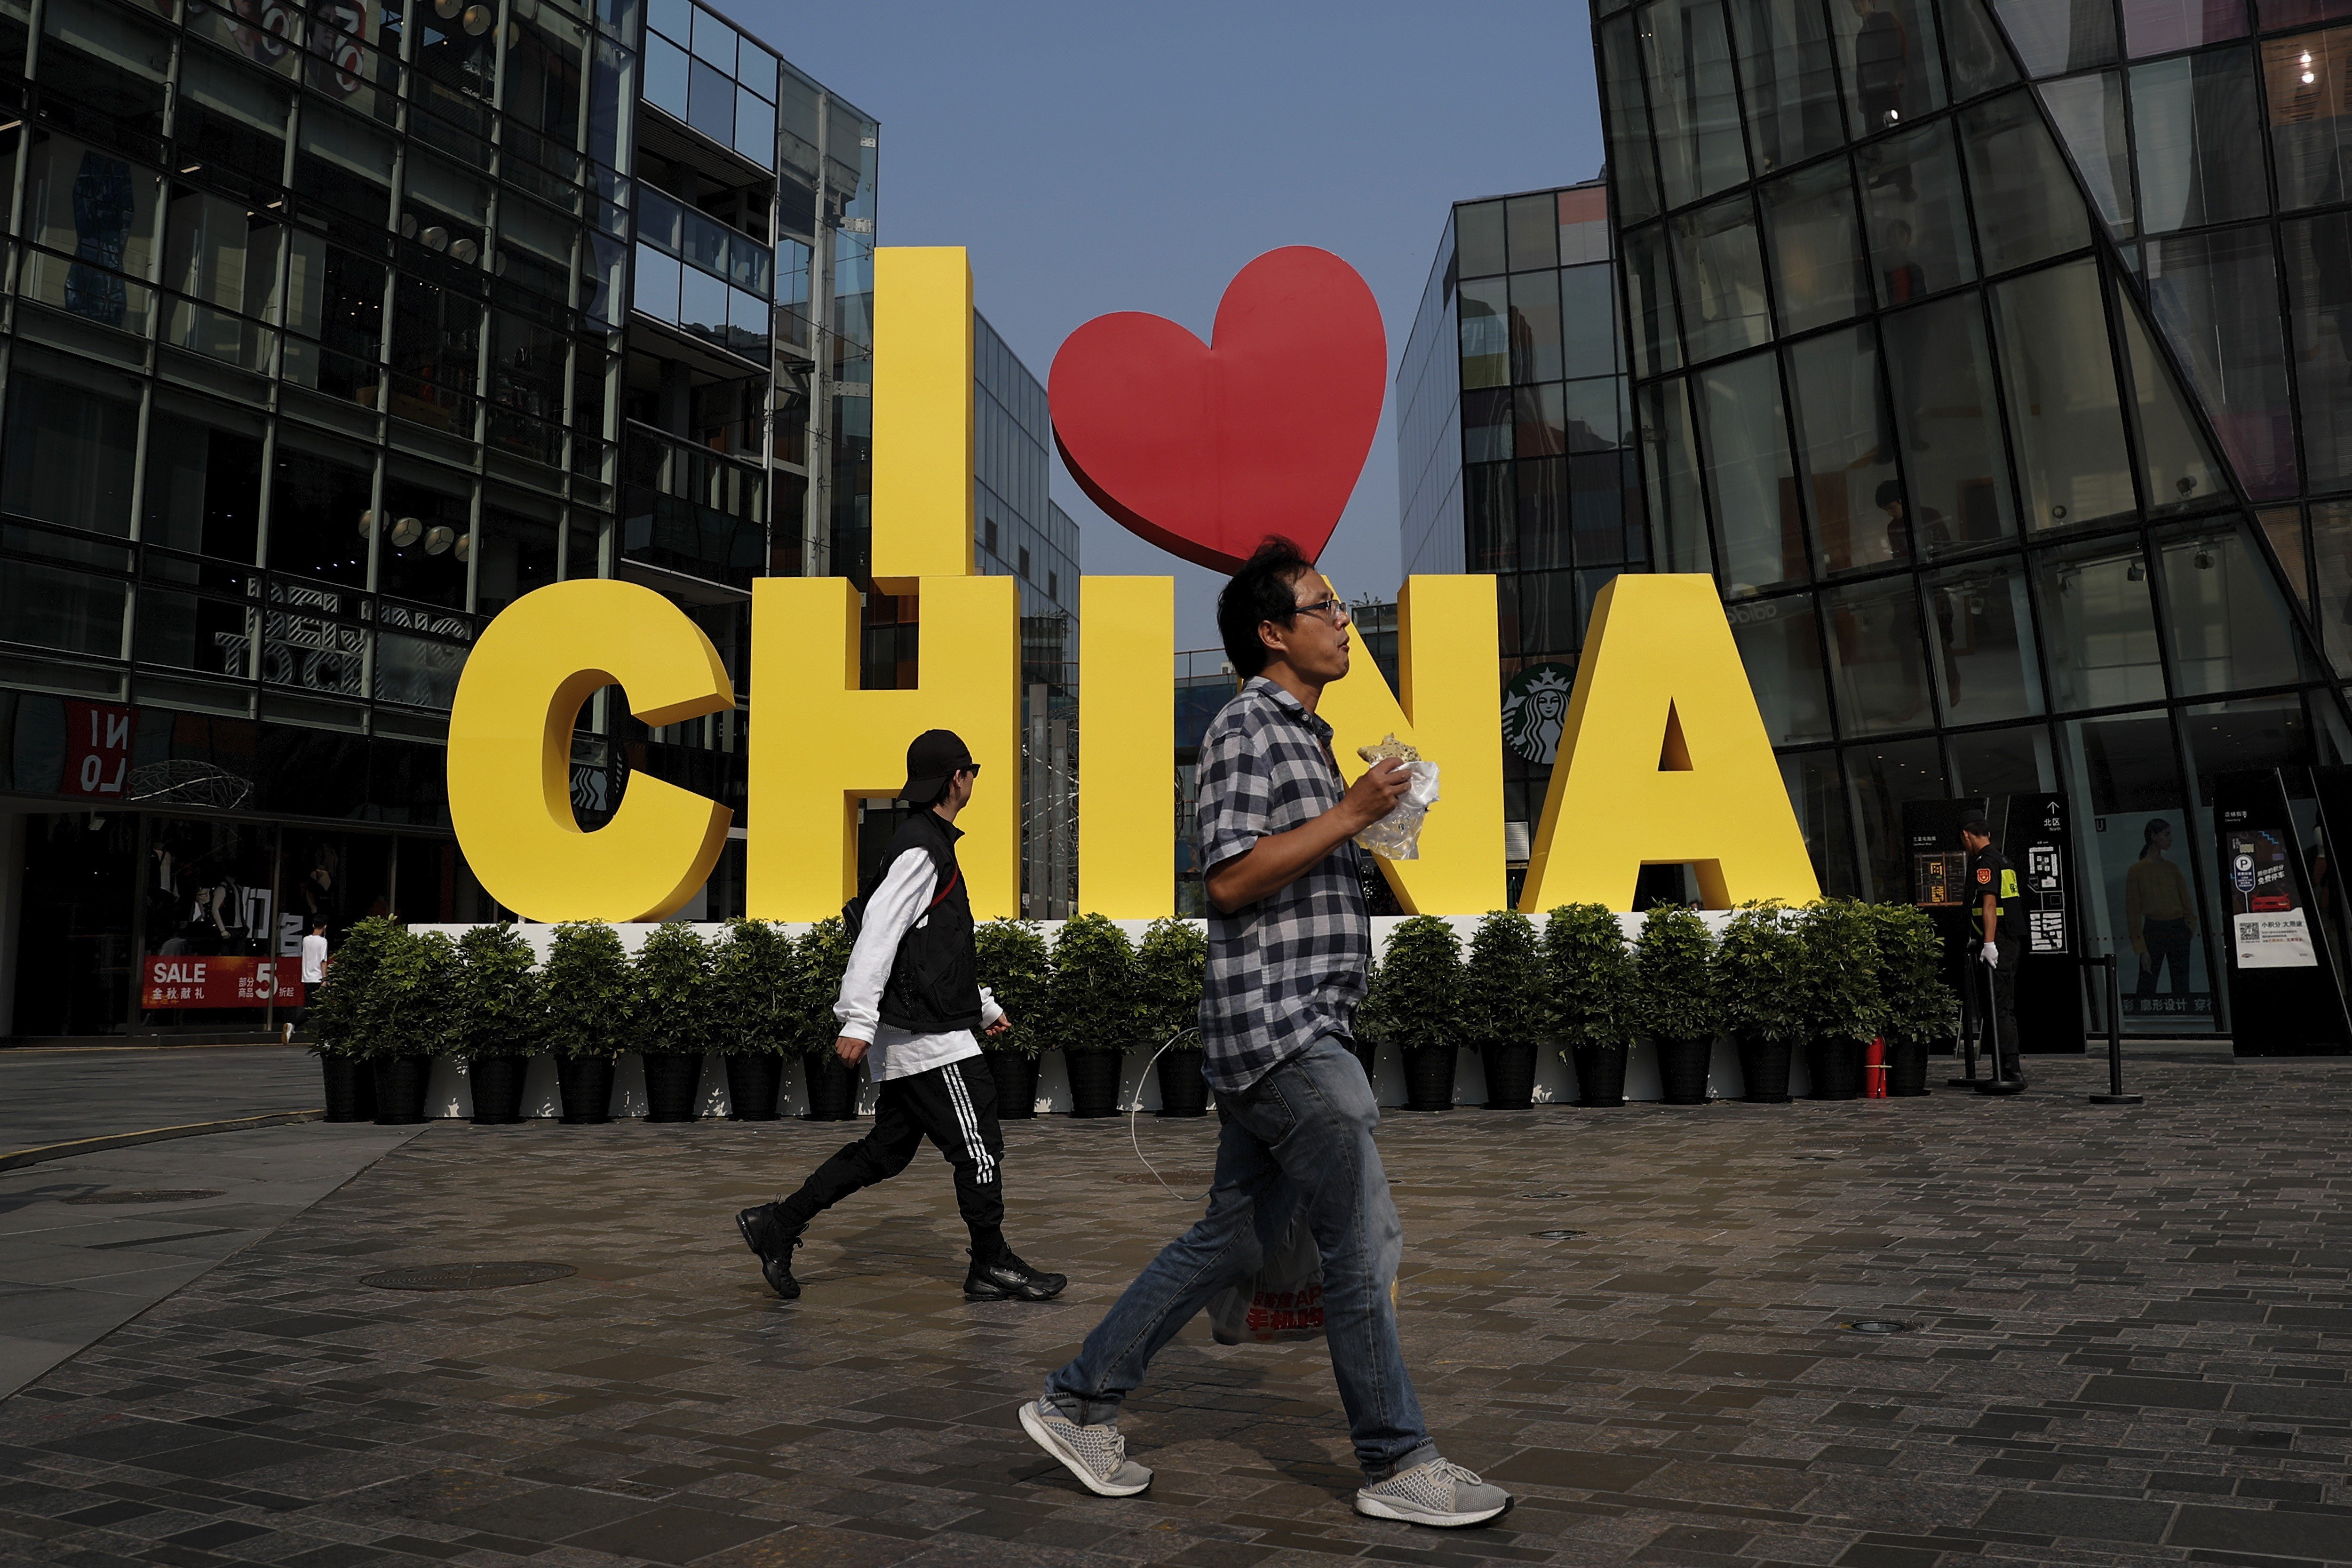 People walk past a shopping centre in Beijing on September 29. The government must step back from economic overreach to allow investor confidence to return and the most dynamic companies to thrive. Photo: AP